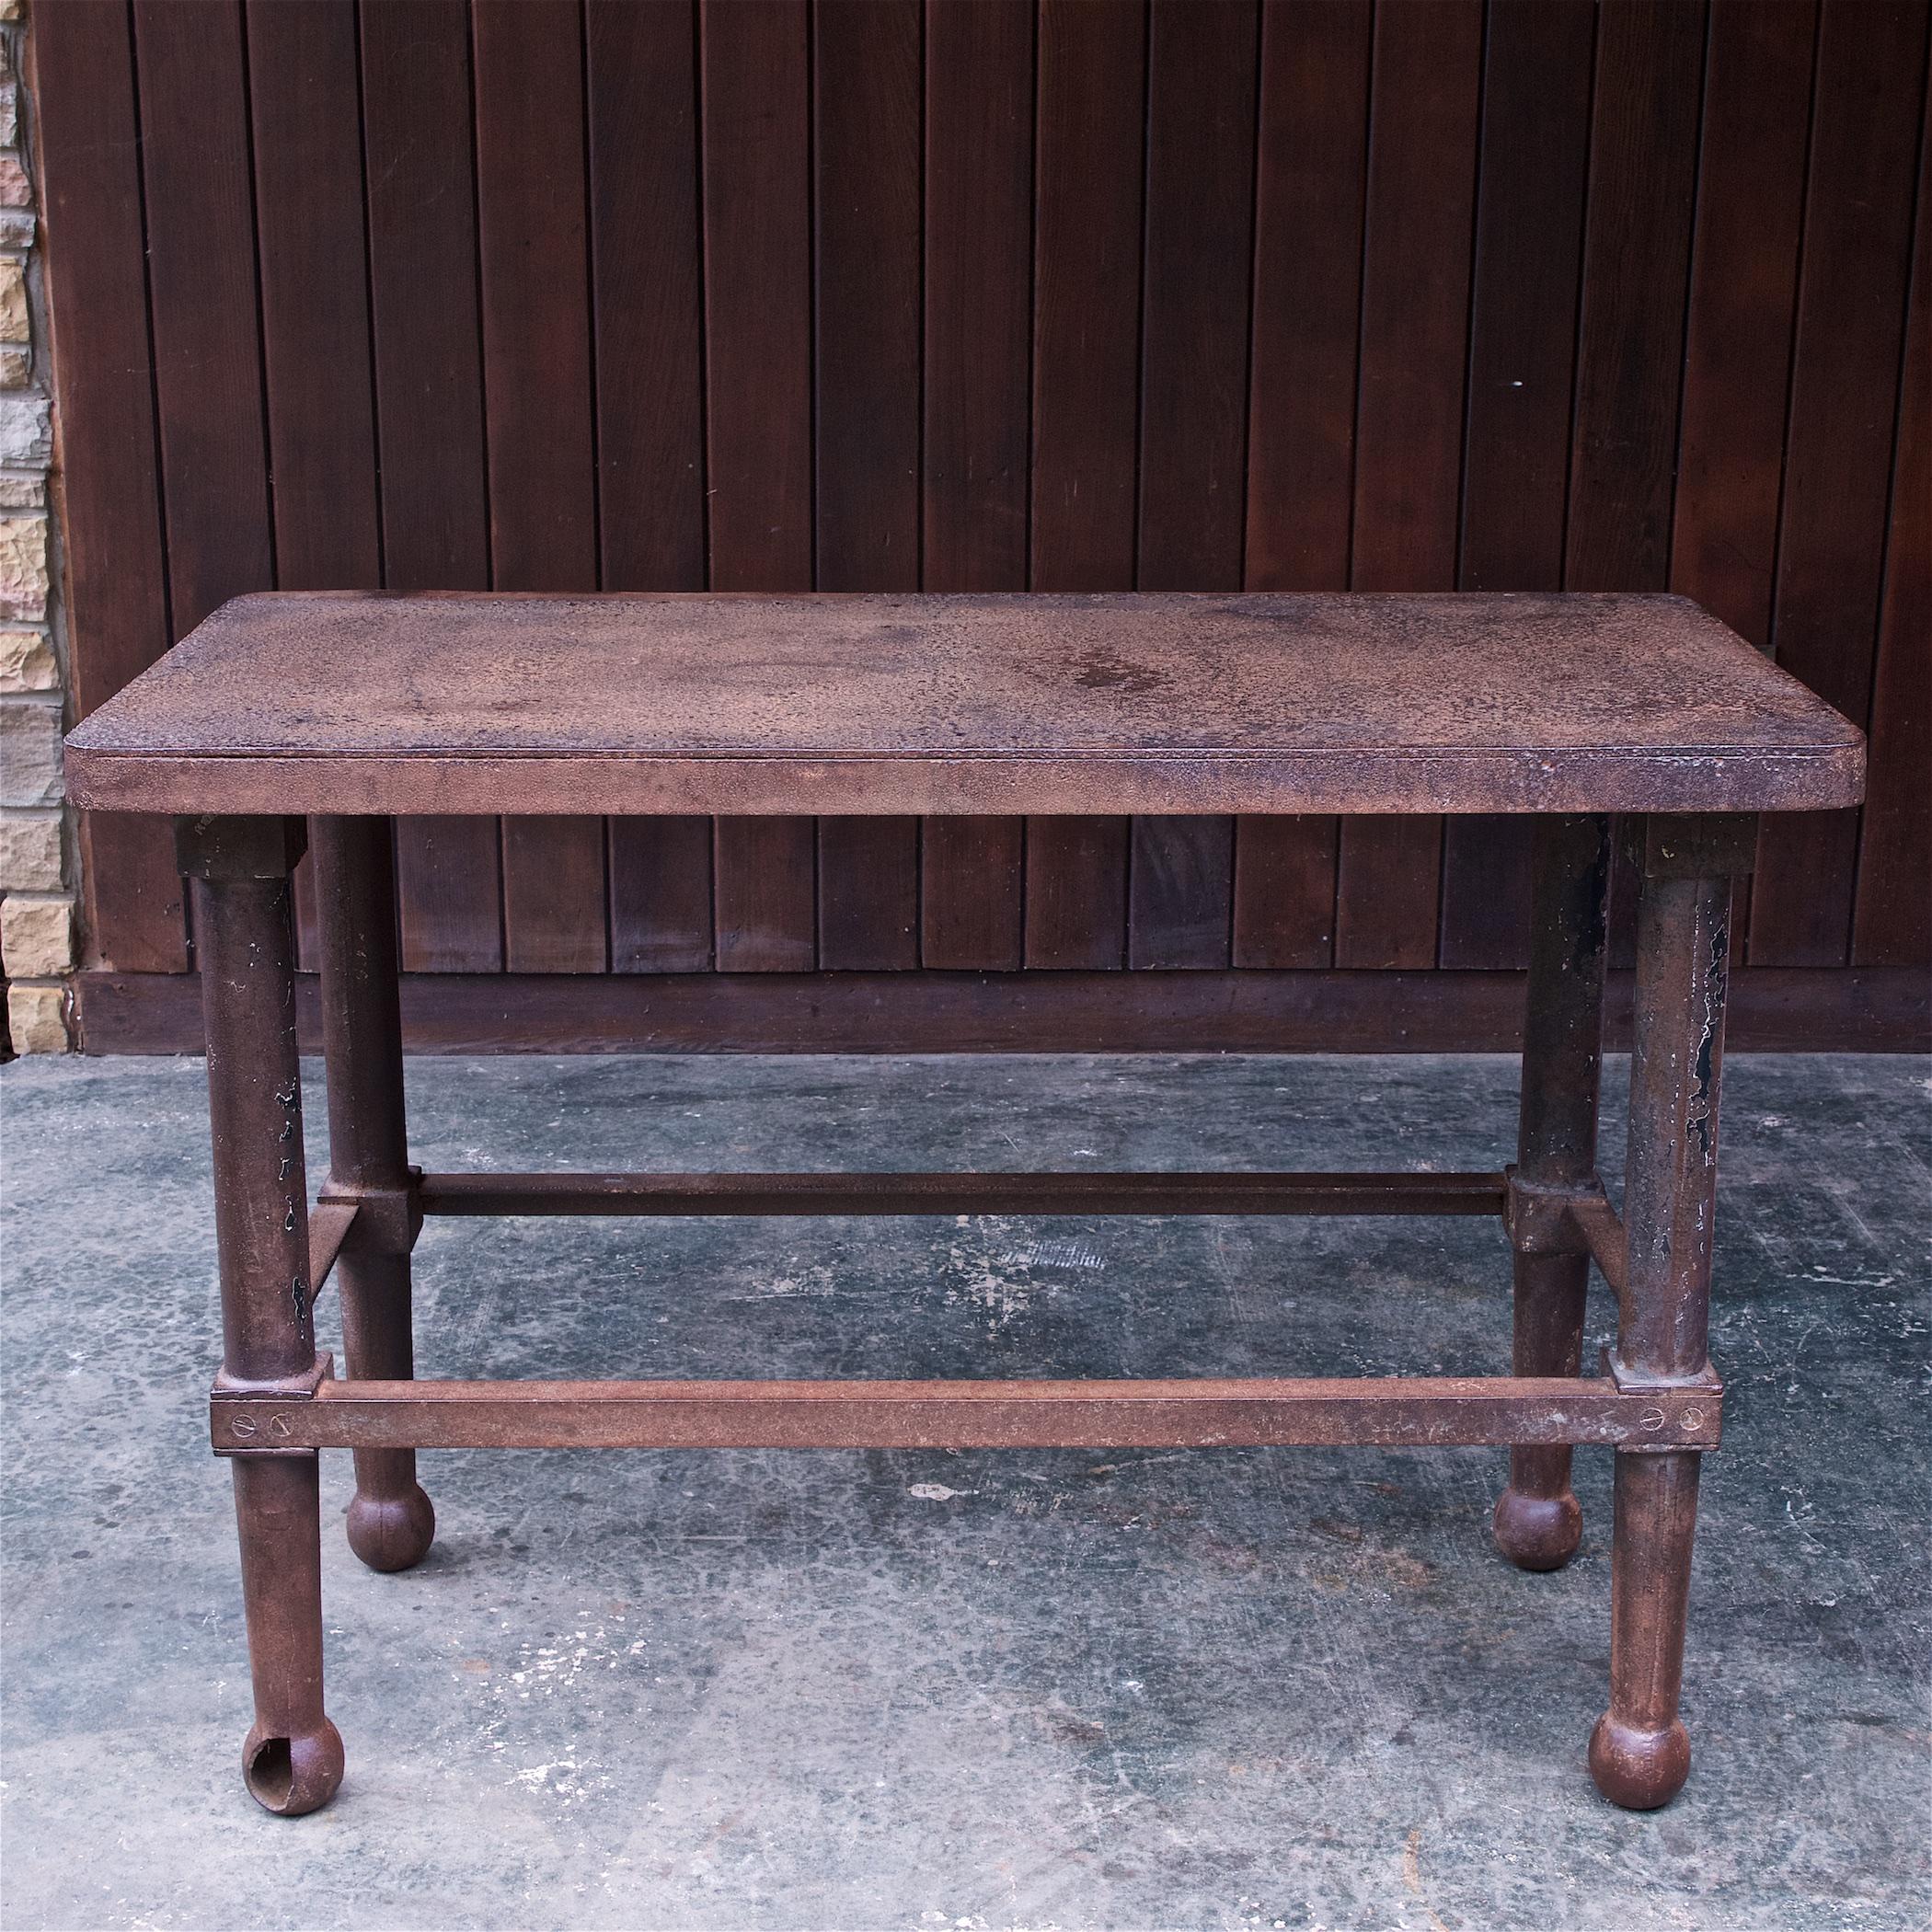 Steel 1880s Victorian Mercantile Forged Iron Work Table Vintage Industrial Console For Sale